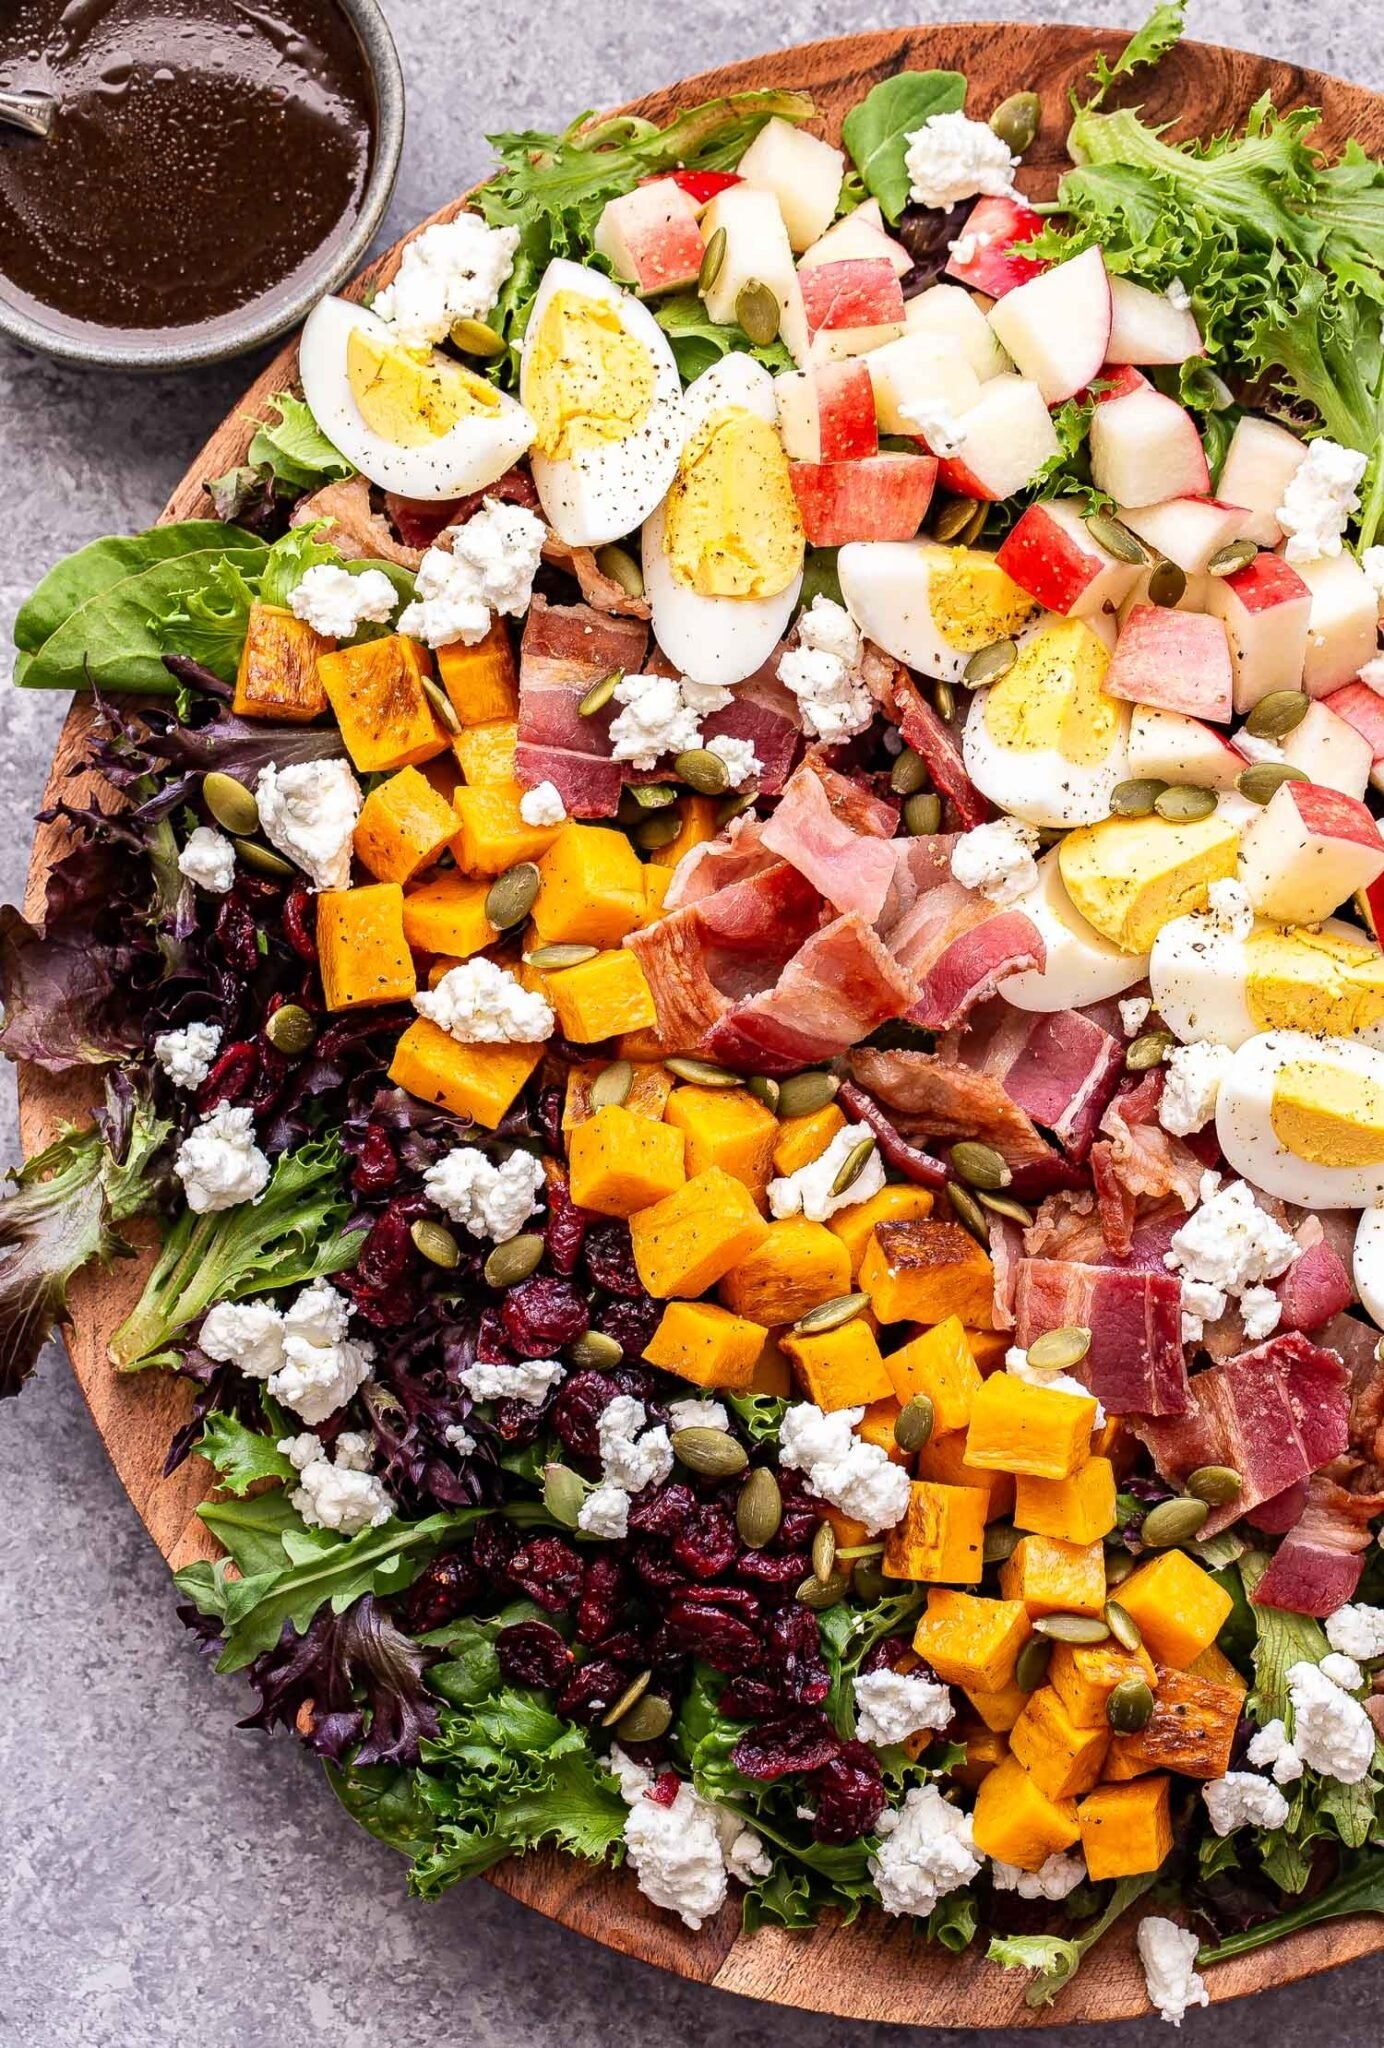 A fall cobb salad with sweet potato, bacon, craisins, apples. and more.